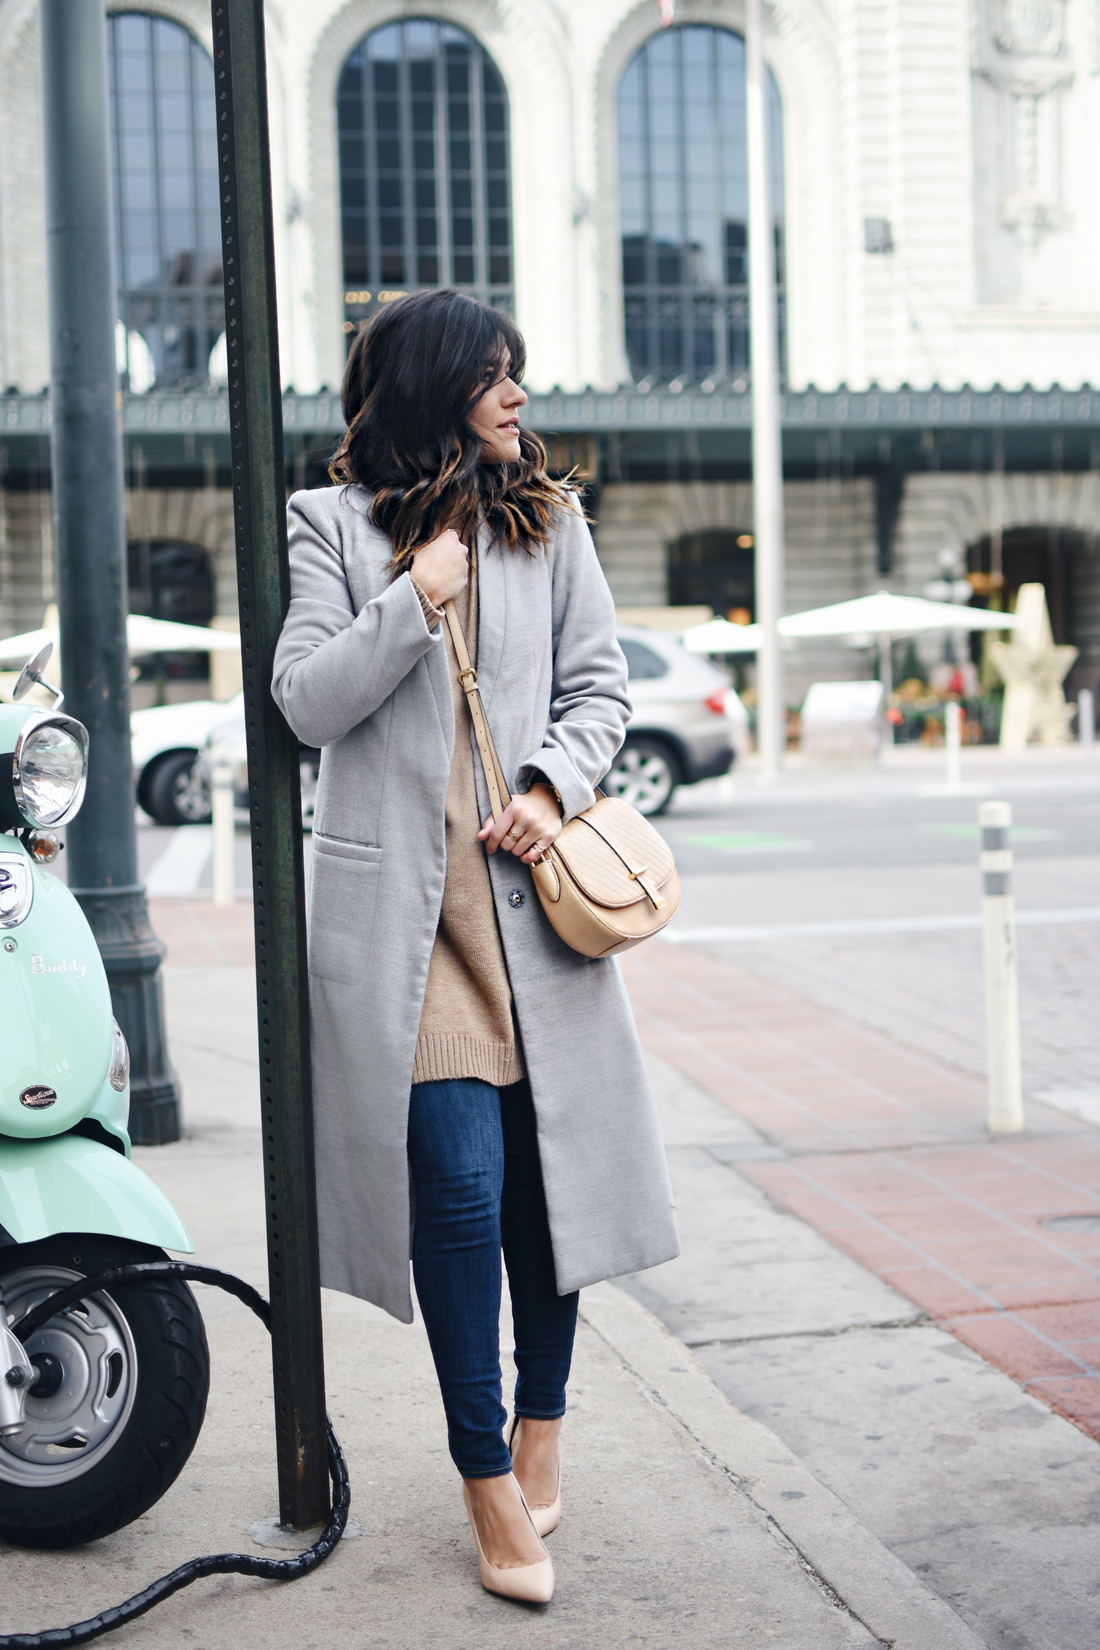 Carolina Hellal of Chic Talk wearing a Shein gray long coat, Paige skinny jeans, Calvin Klein bag, NA-KD sweater, and Sam Edelman Shoes.